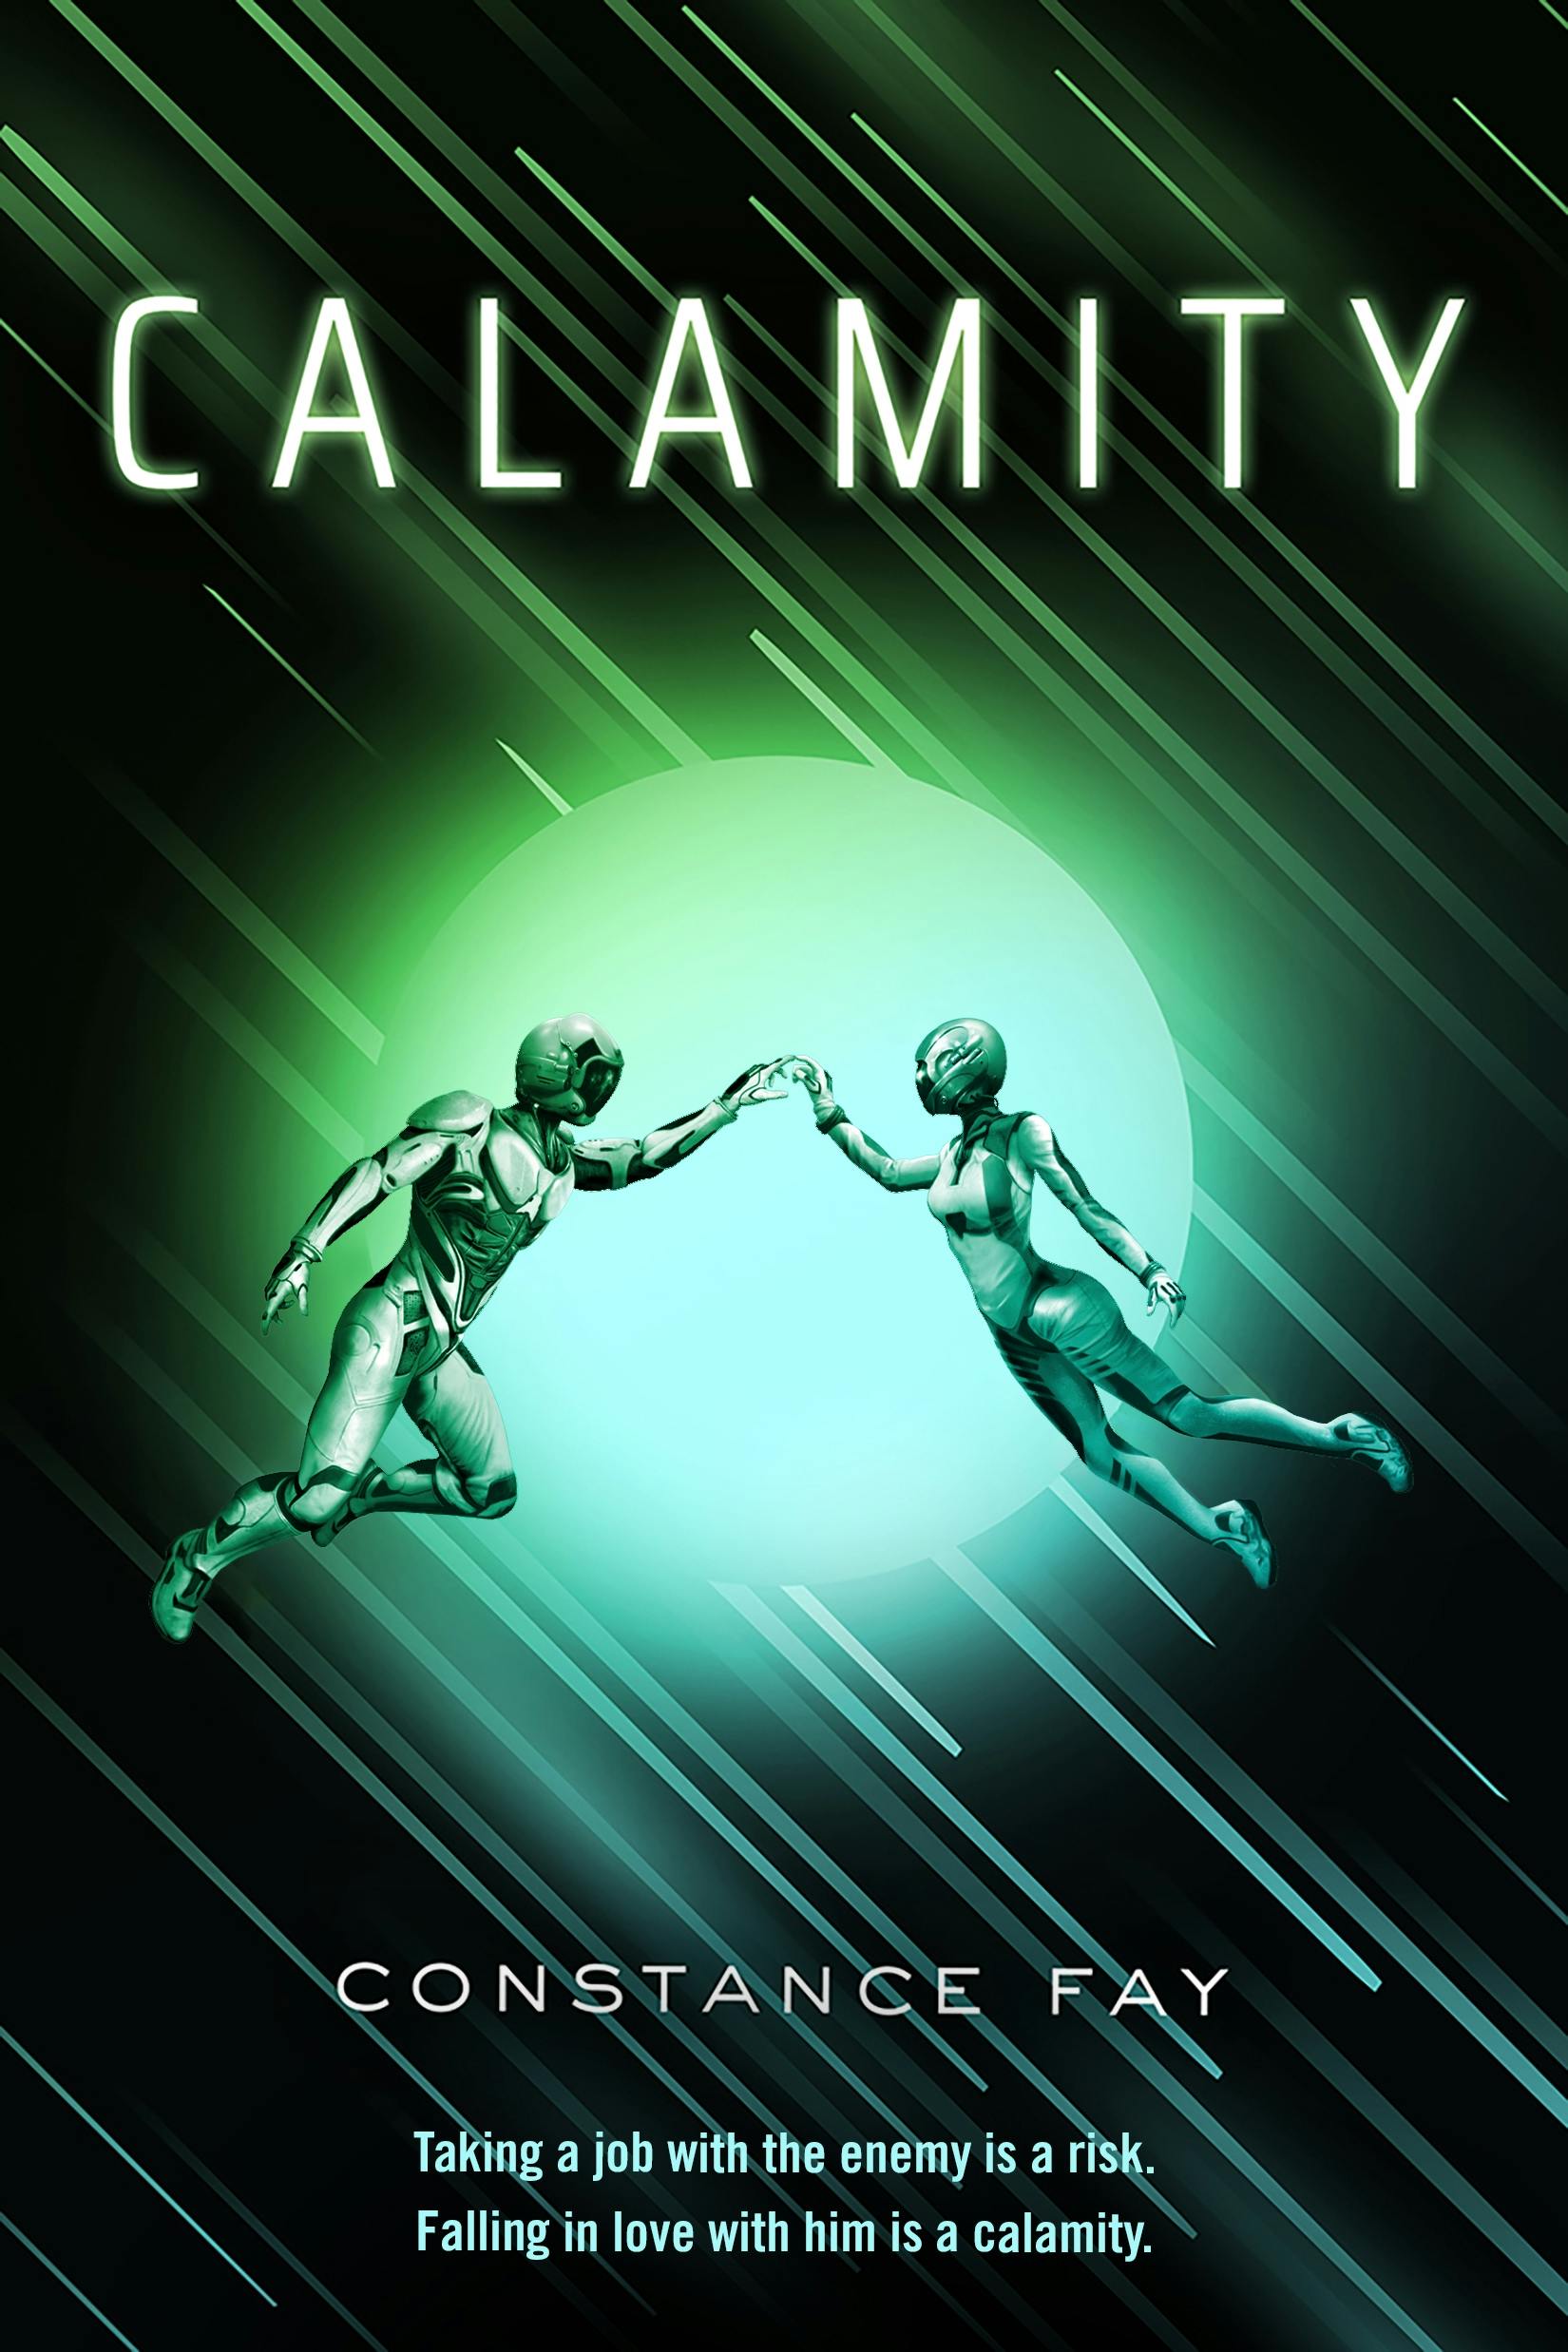 Cover for the book titled as: Calamity